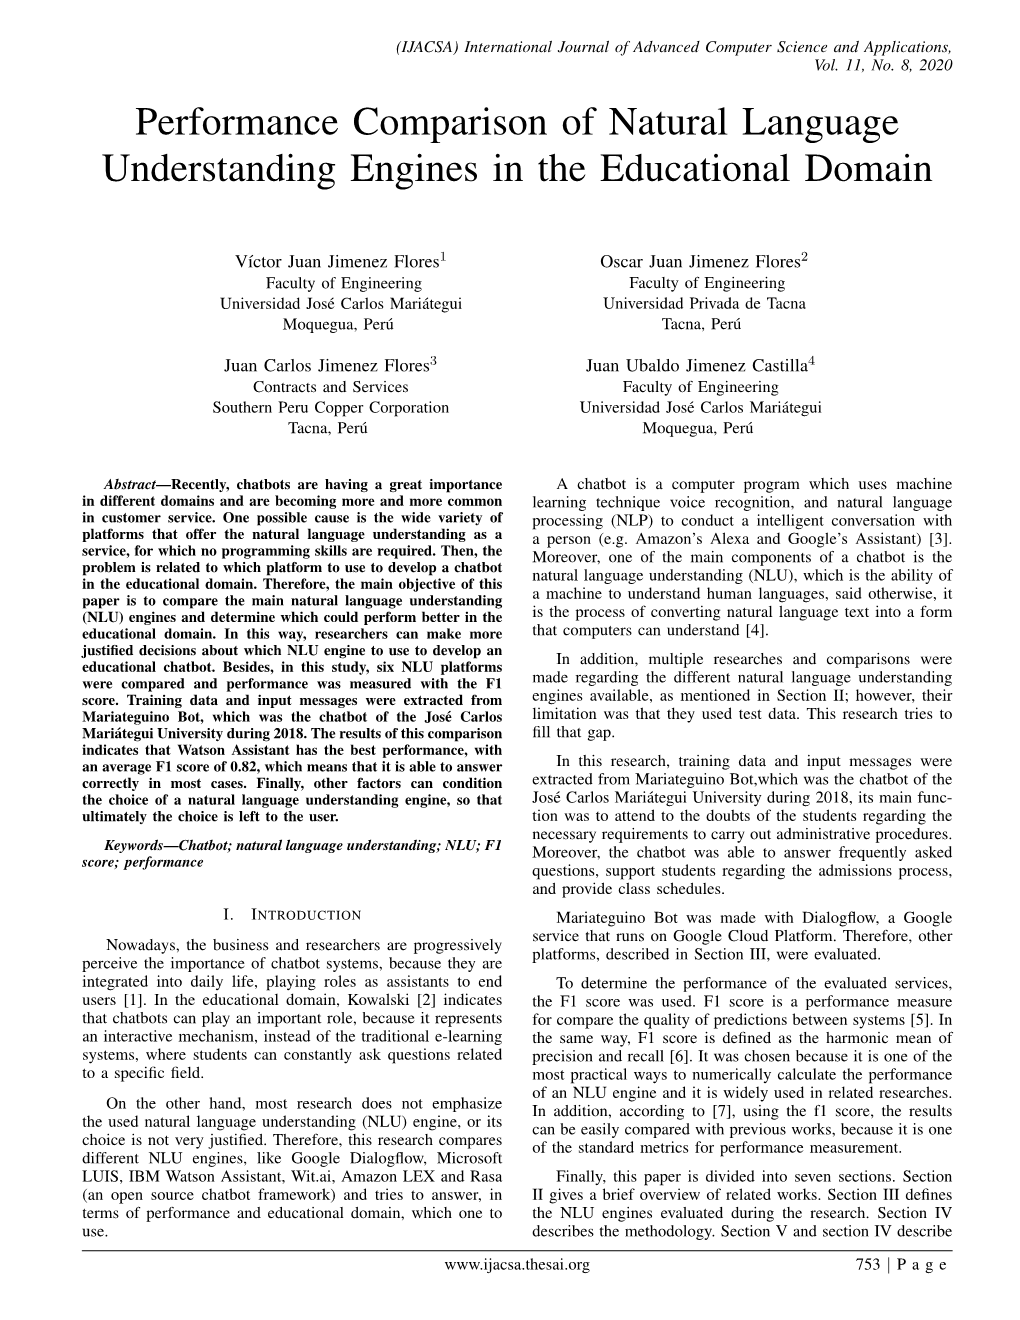 Performance Comparison of Natural Language Understanding Engines in the Educational Domain